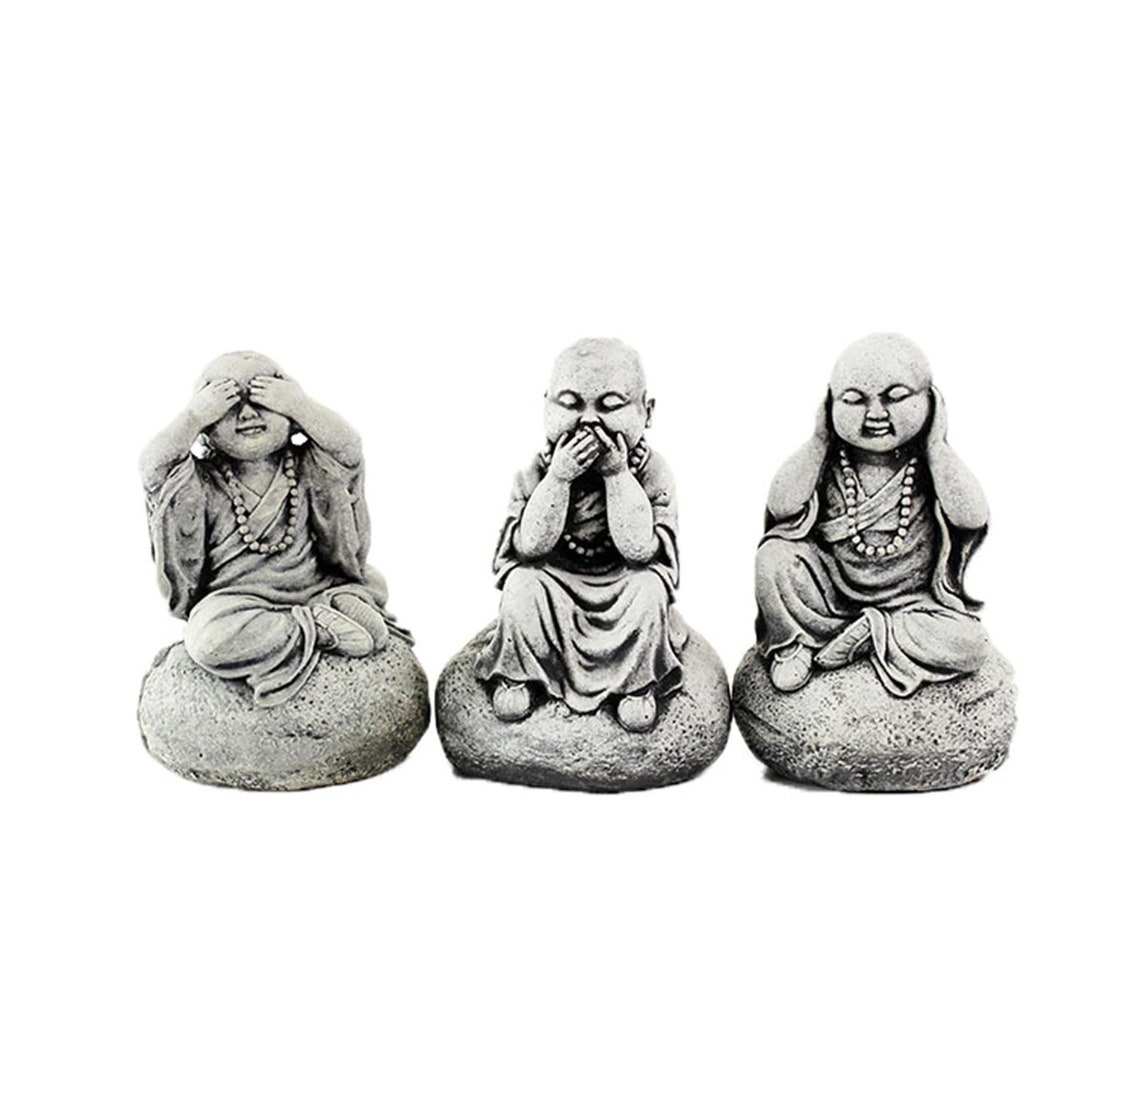 Three Wise Monks Statues Set of 3 Sitting Cement Buddha | Etsy